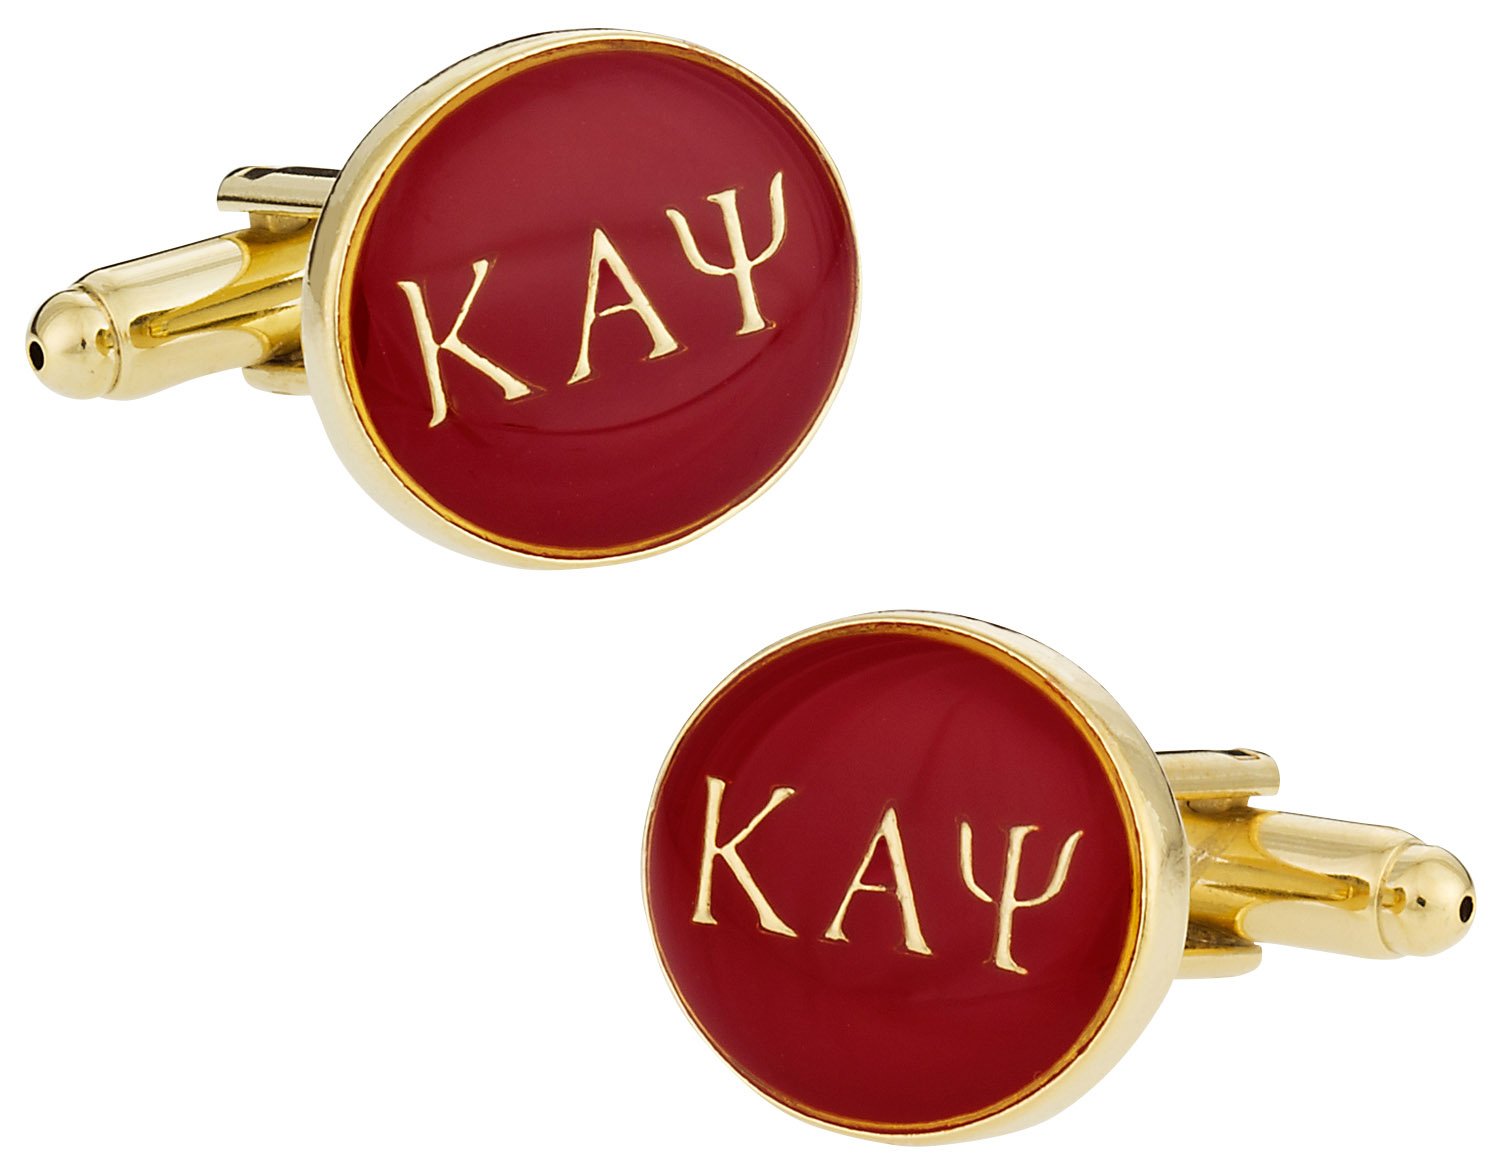 Gold Kappa Alpha Psi Fraternity Cuff Links with Hard-Sided Presentation Gift Box Paraphernalia - Crimson Red & Gold